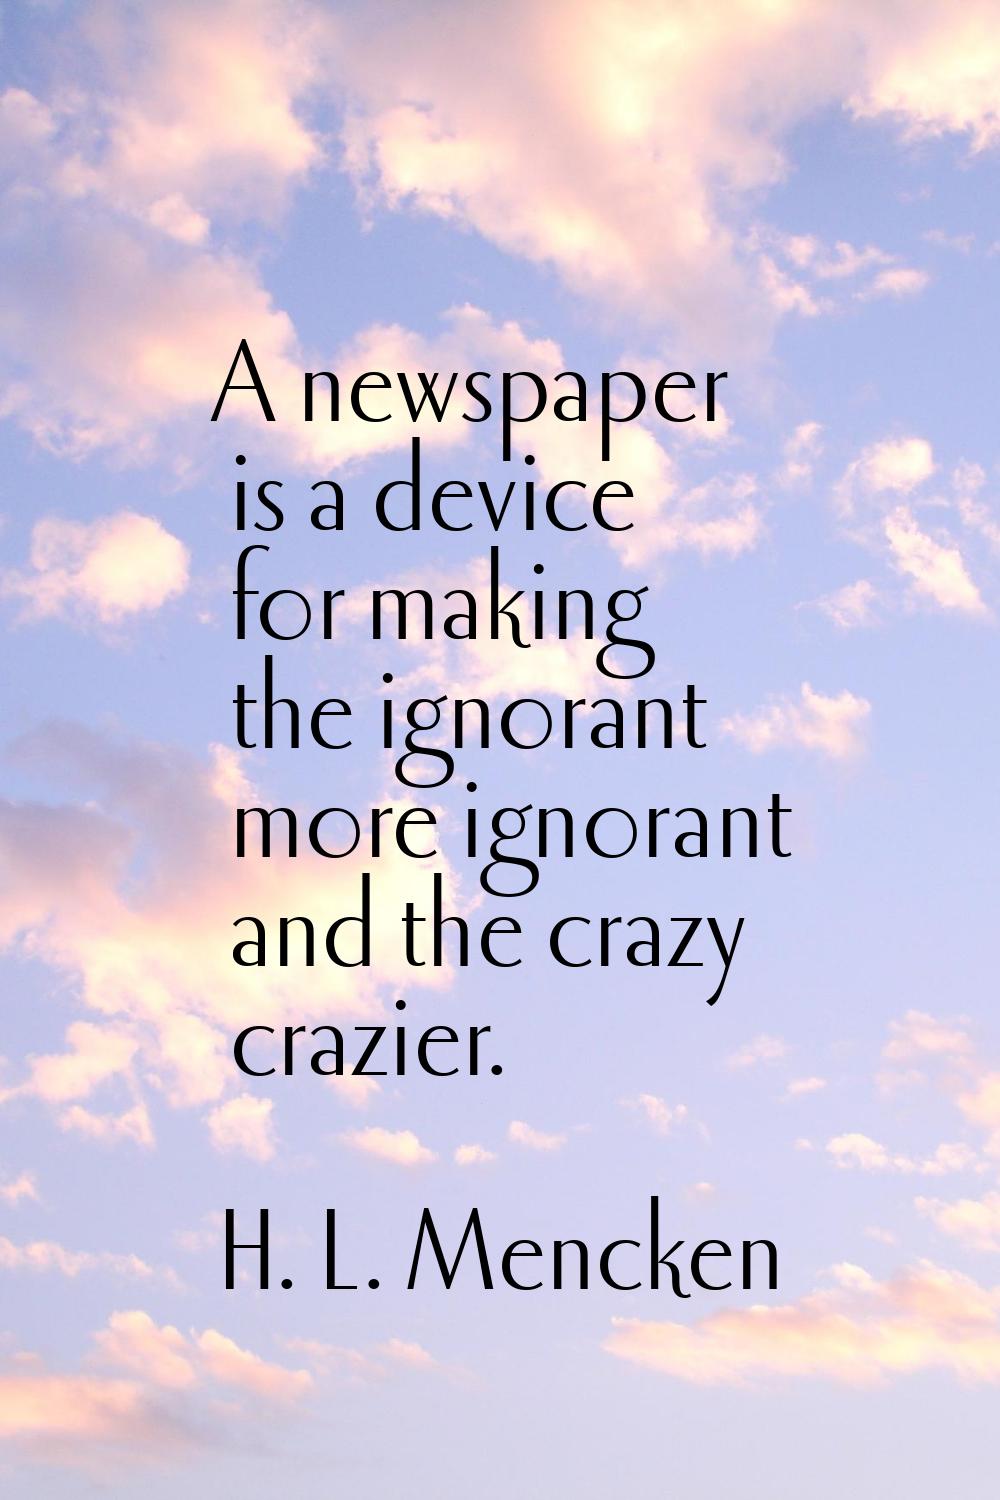 A newspaper is a device for making the ignorant more ignorant and the crazy crazier.